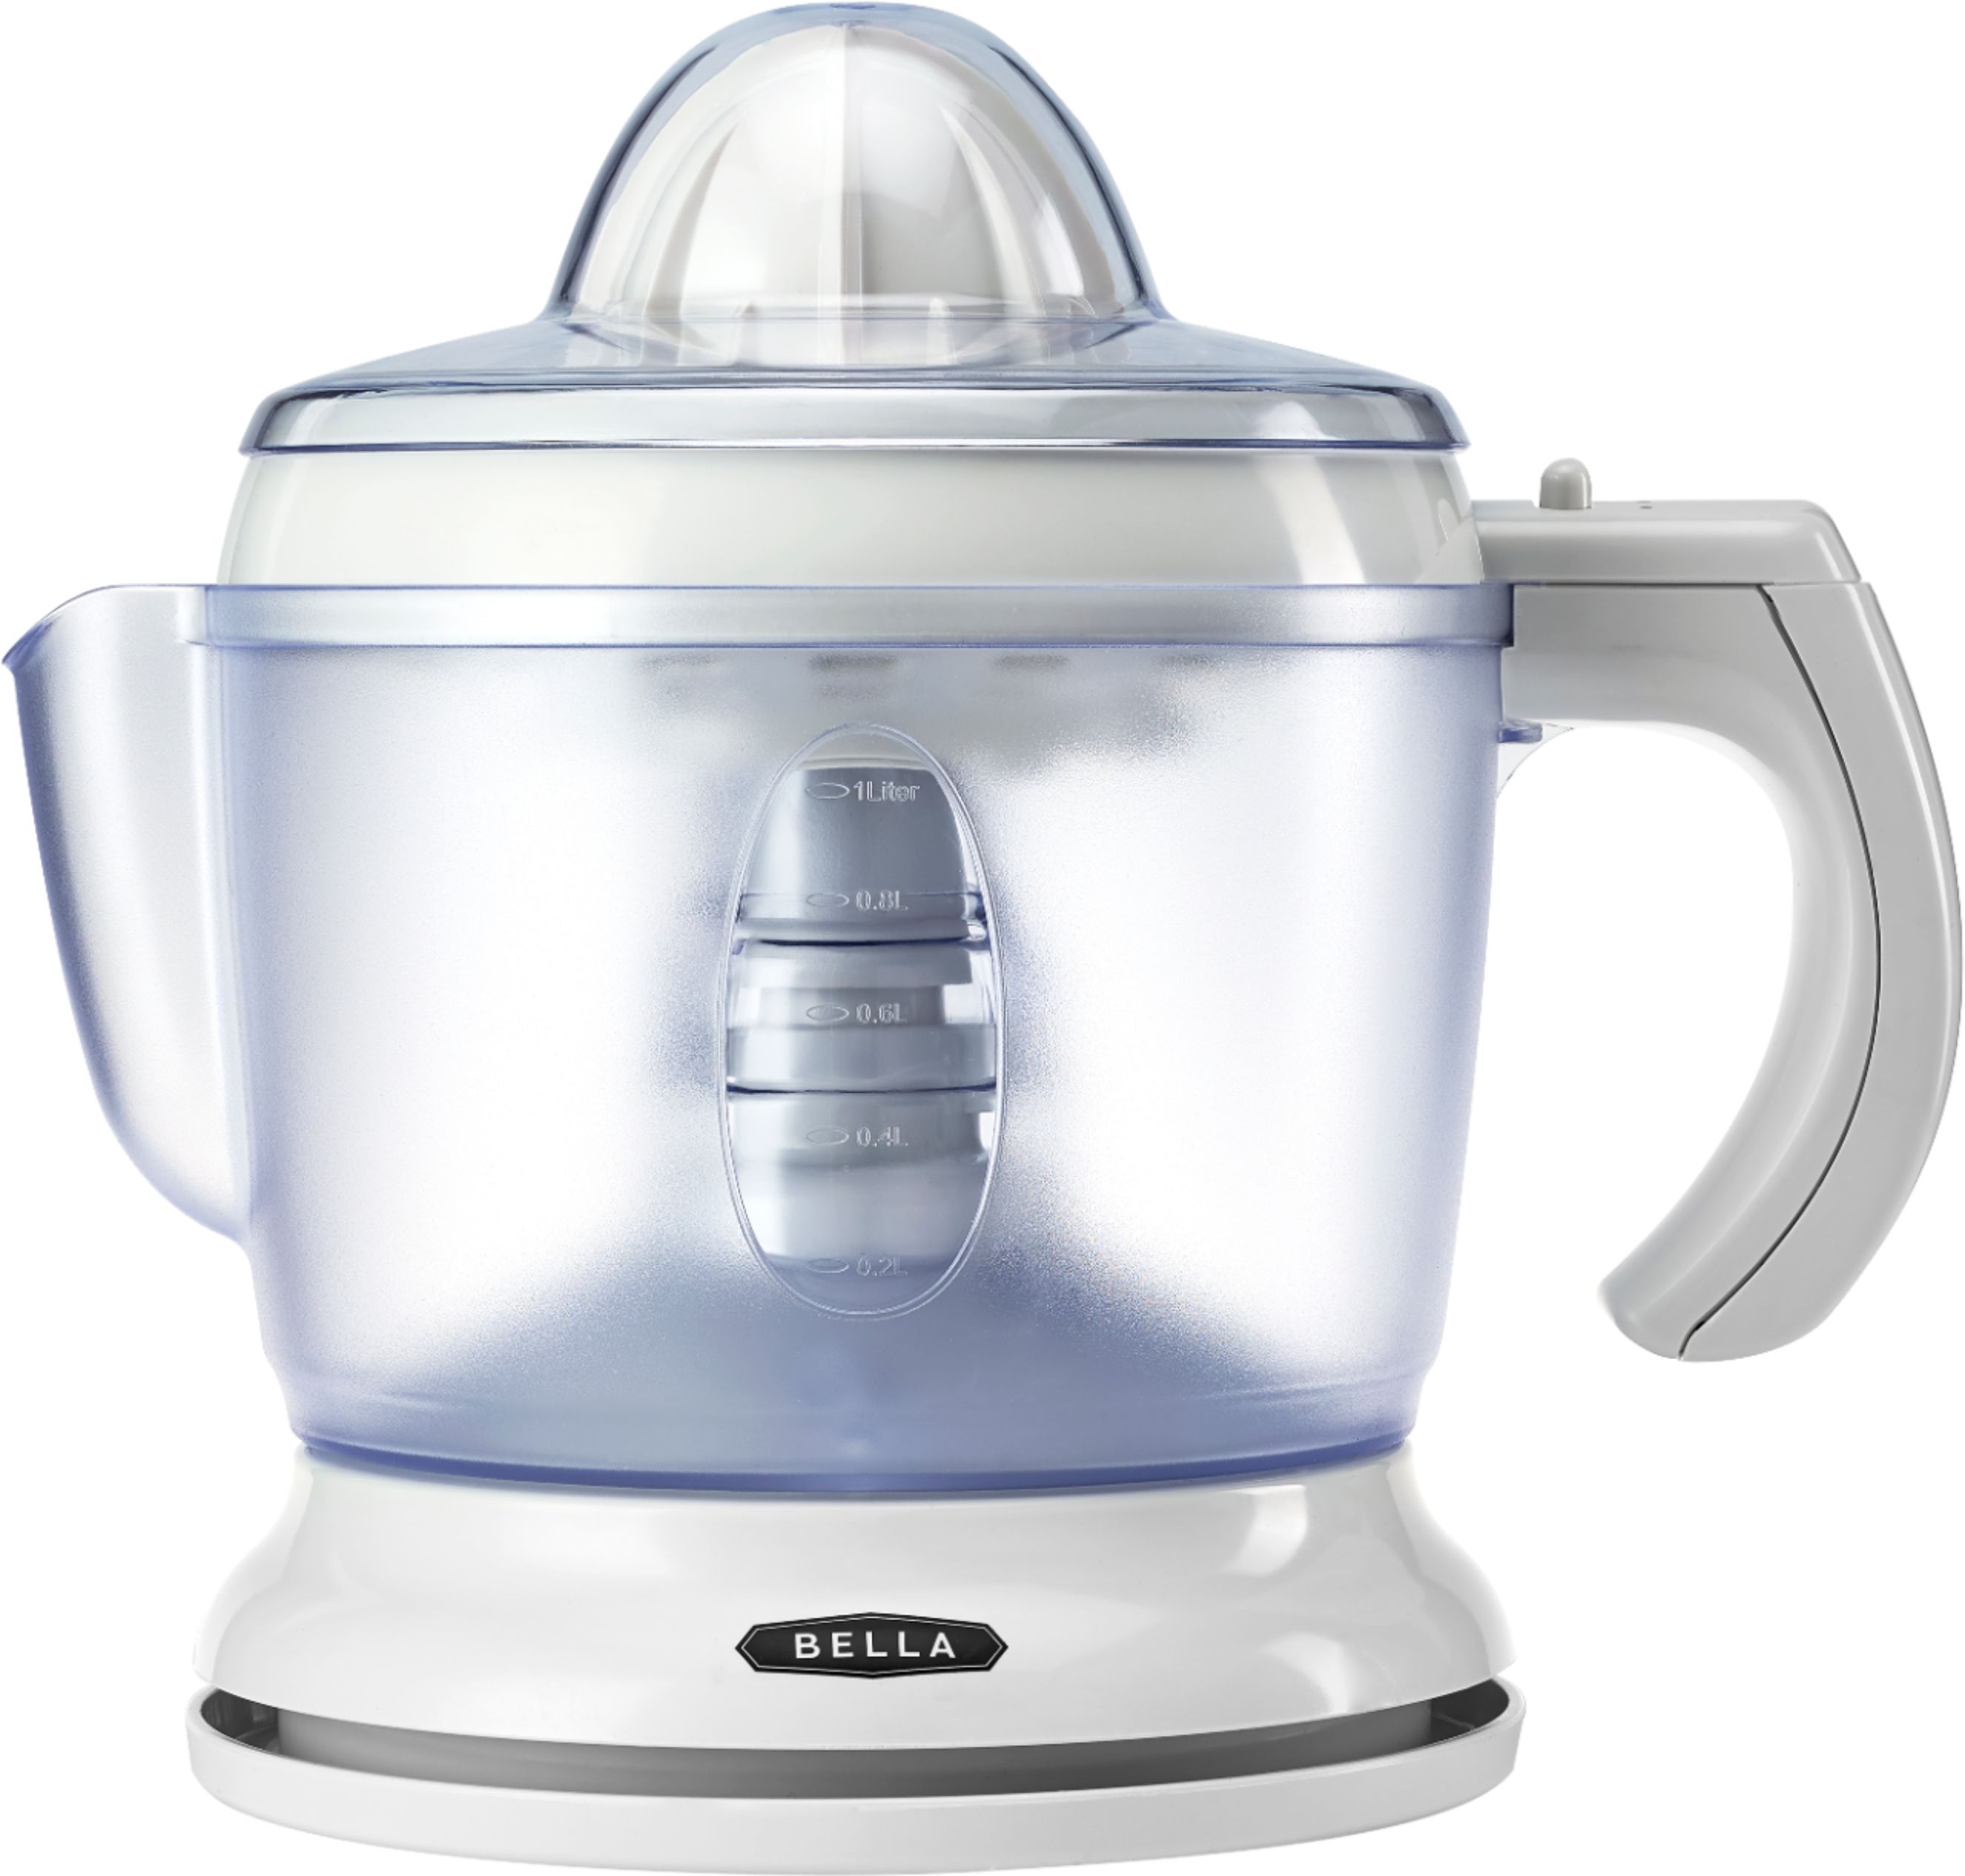 Angle View: Bella - Electric Citrus Juicer - White